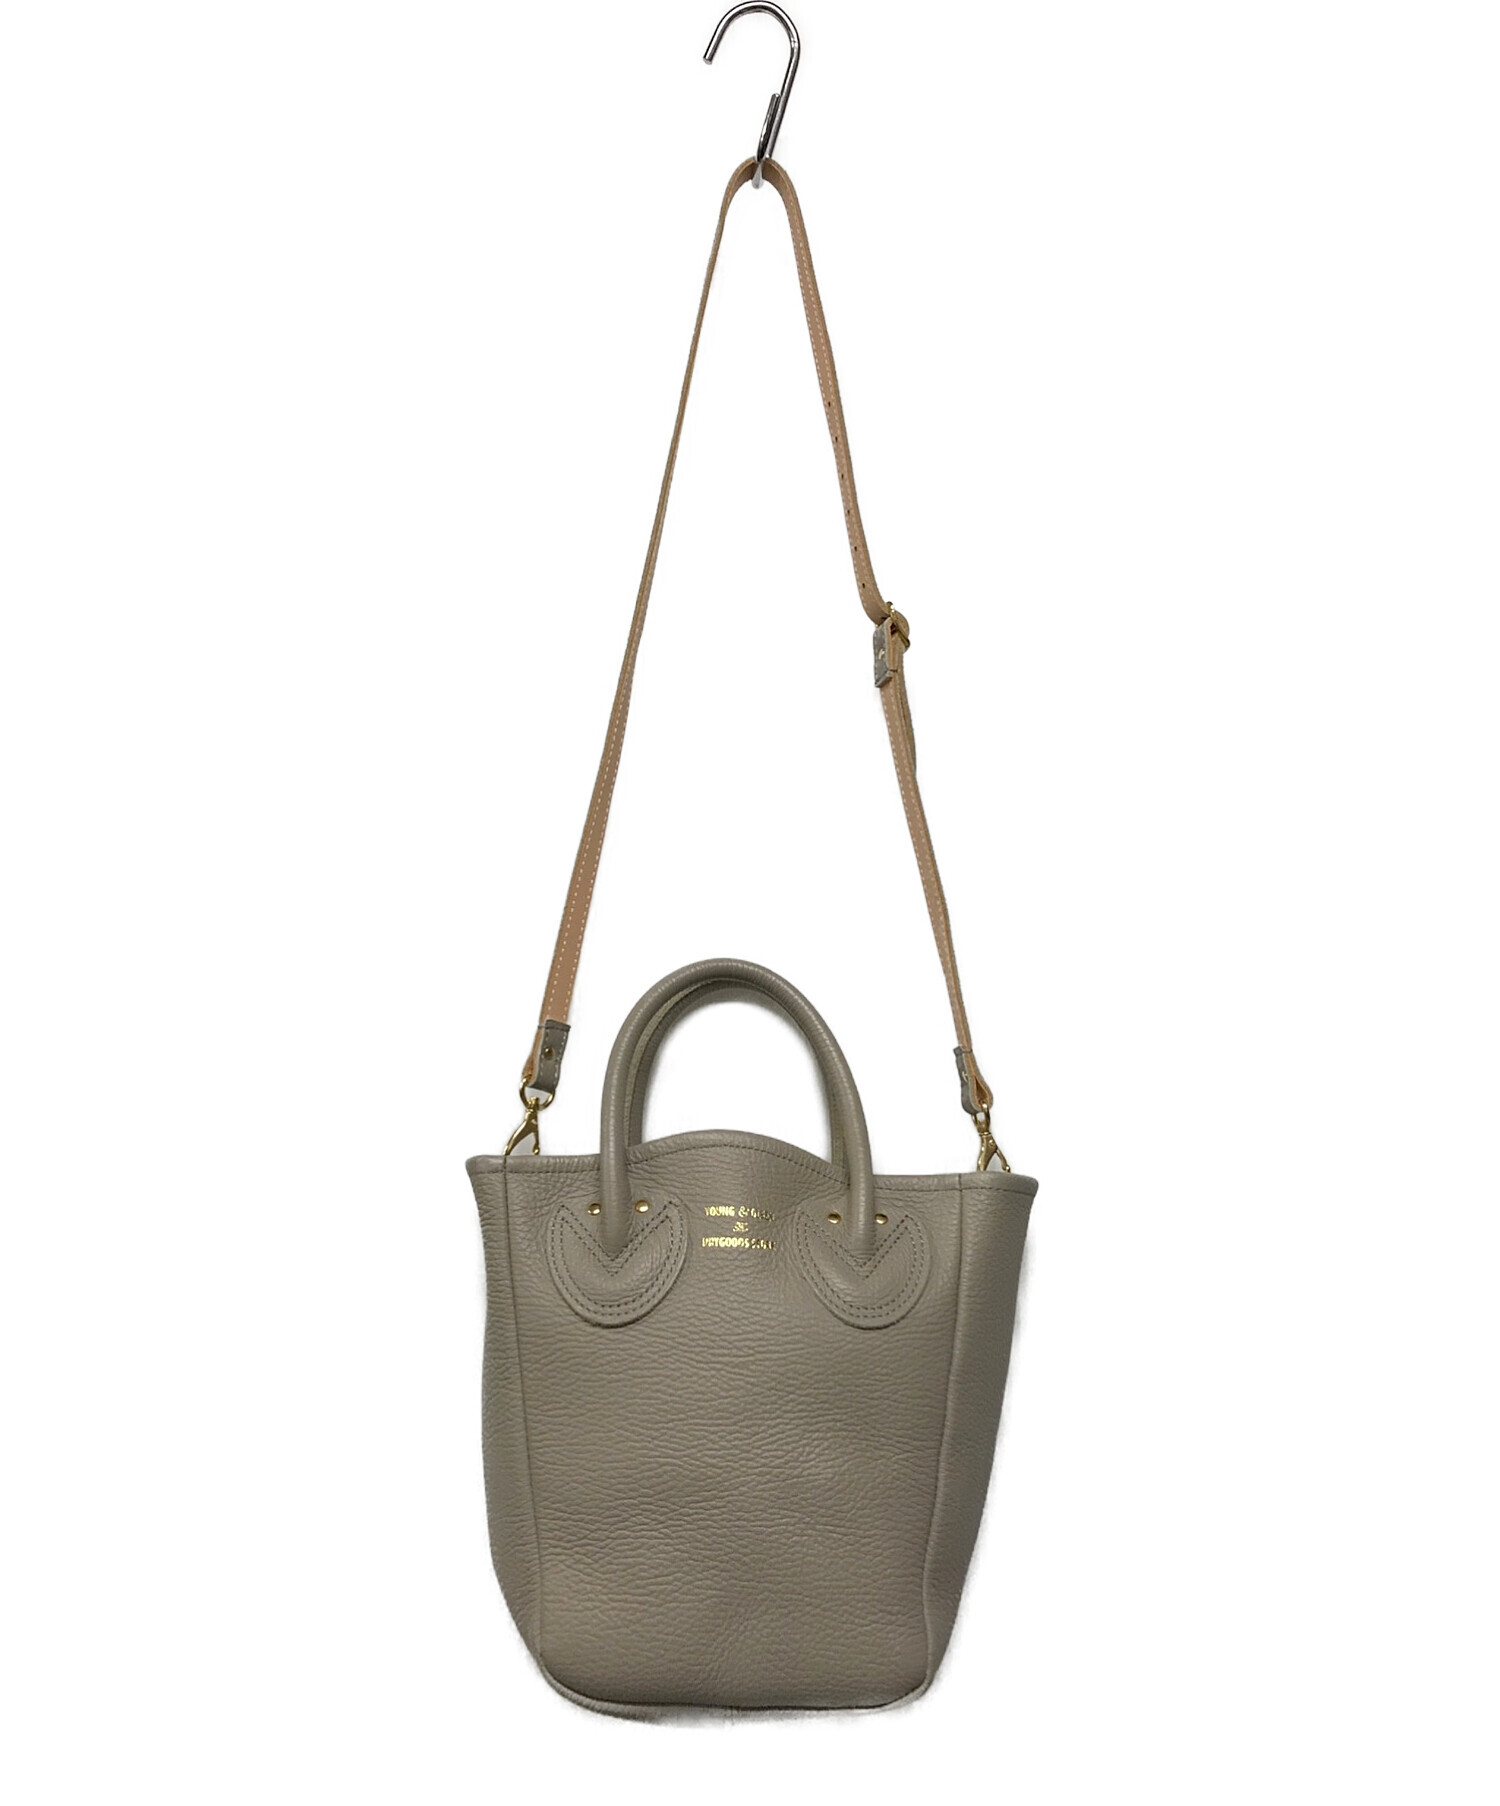 YOUNG & OLSEN The DRYGOODS STORE (ヤングアンドオルセン ザ ドライグッズストア) PETITE LEATHER  TOTE 2WAY ベージュ